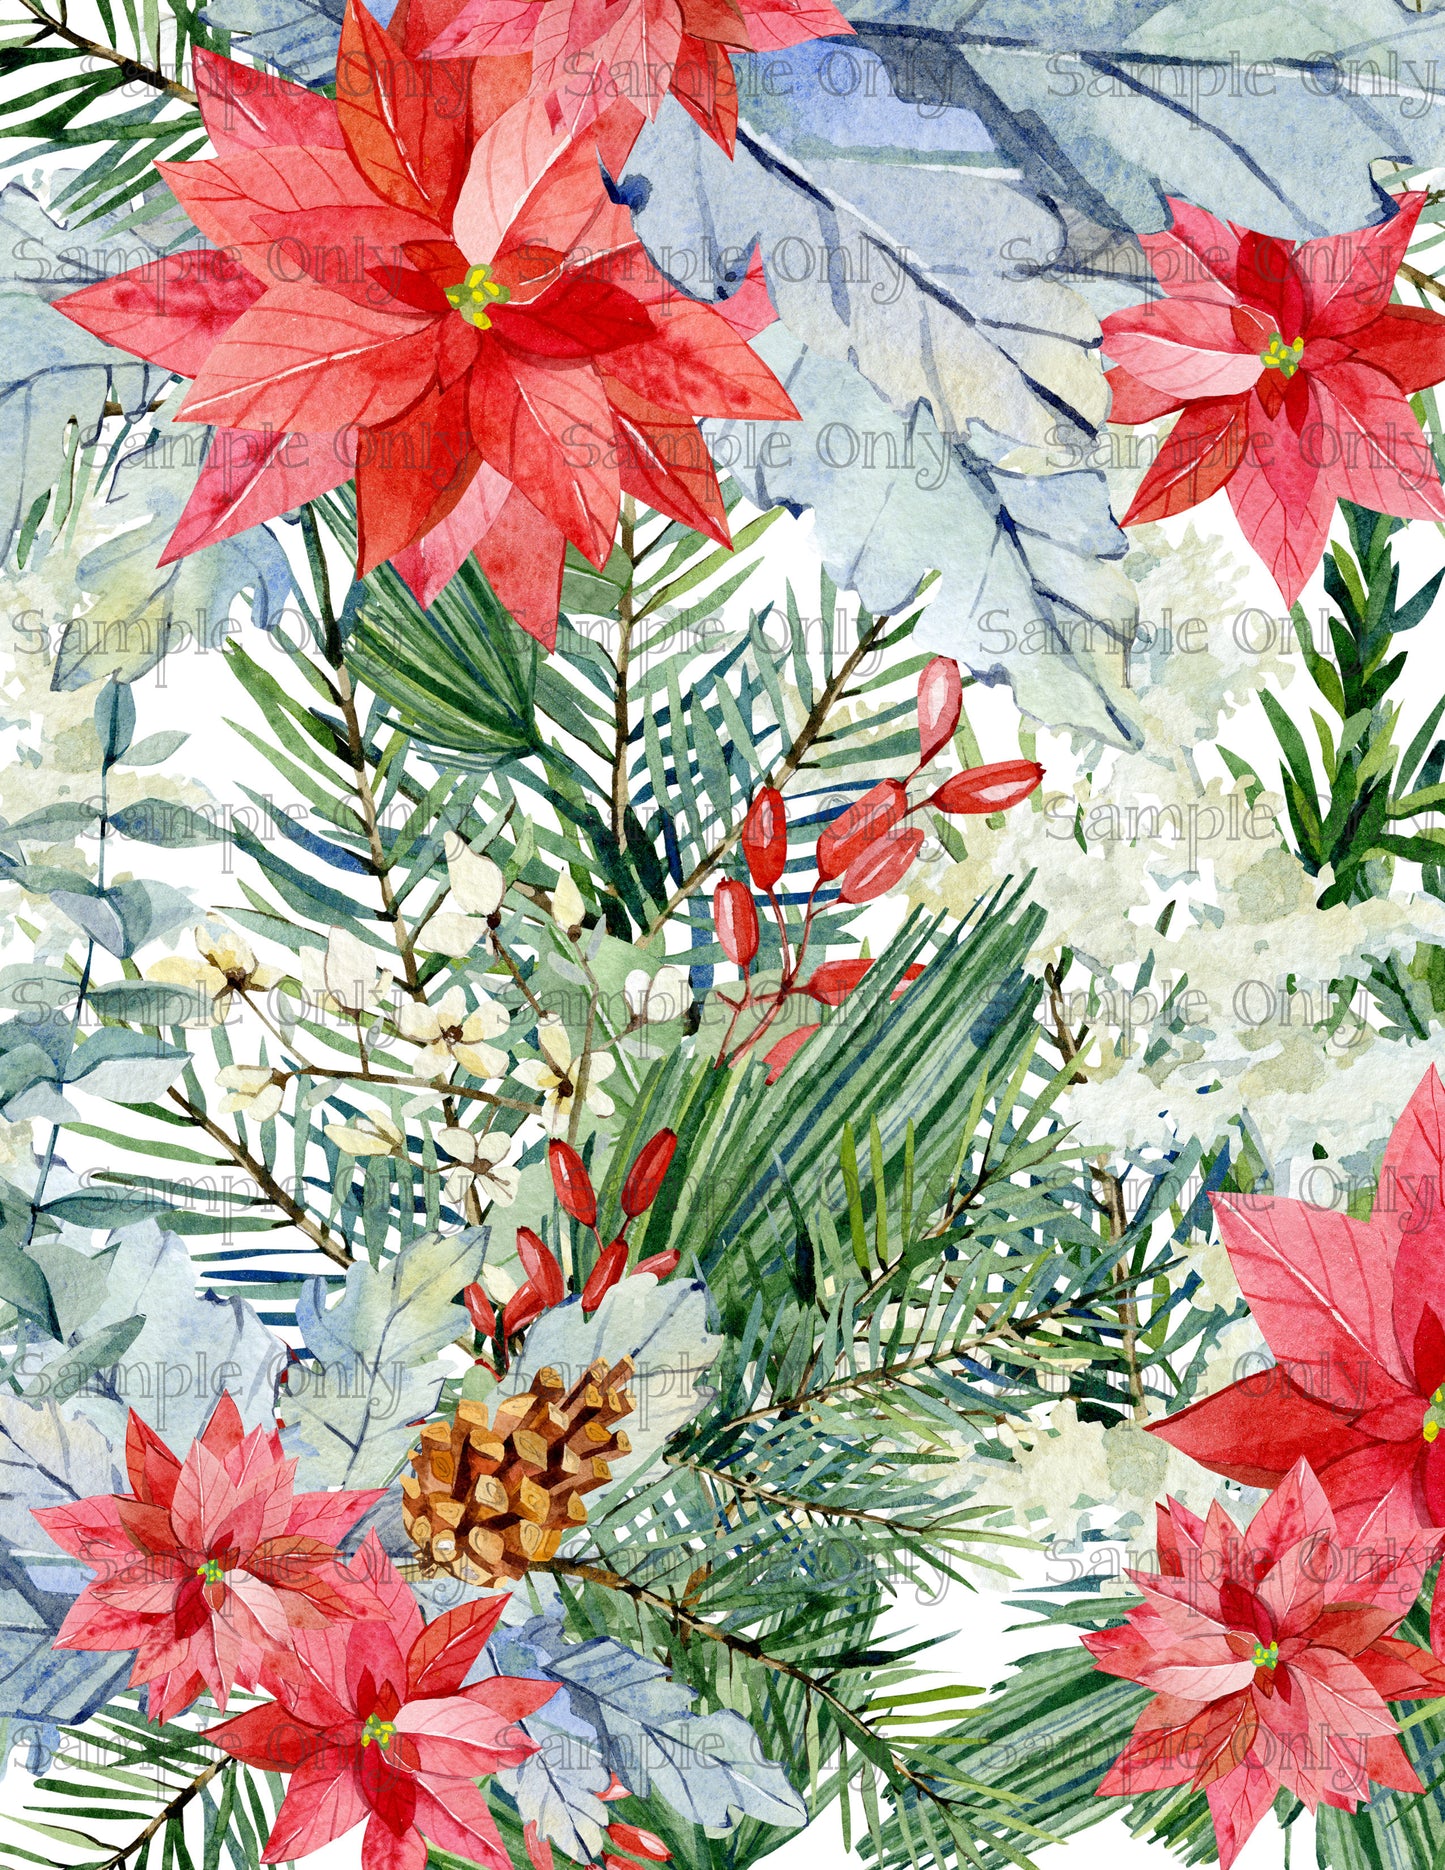 Christmas Floral 11 Image Sheet For Polymer Clay Transfer Decal DIGITAL FILE OR PRINTED